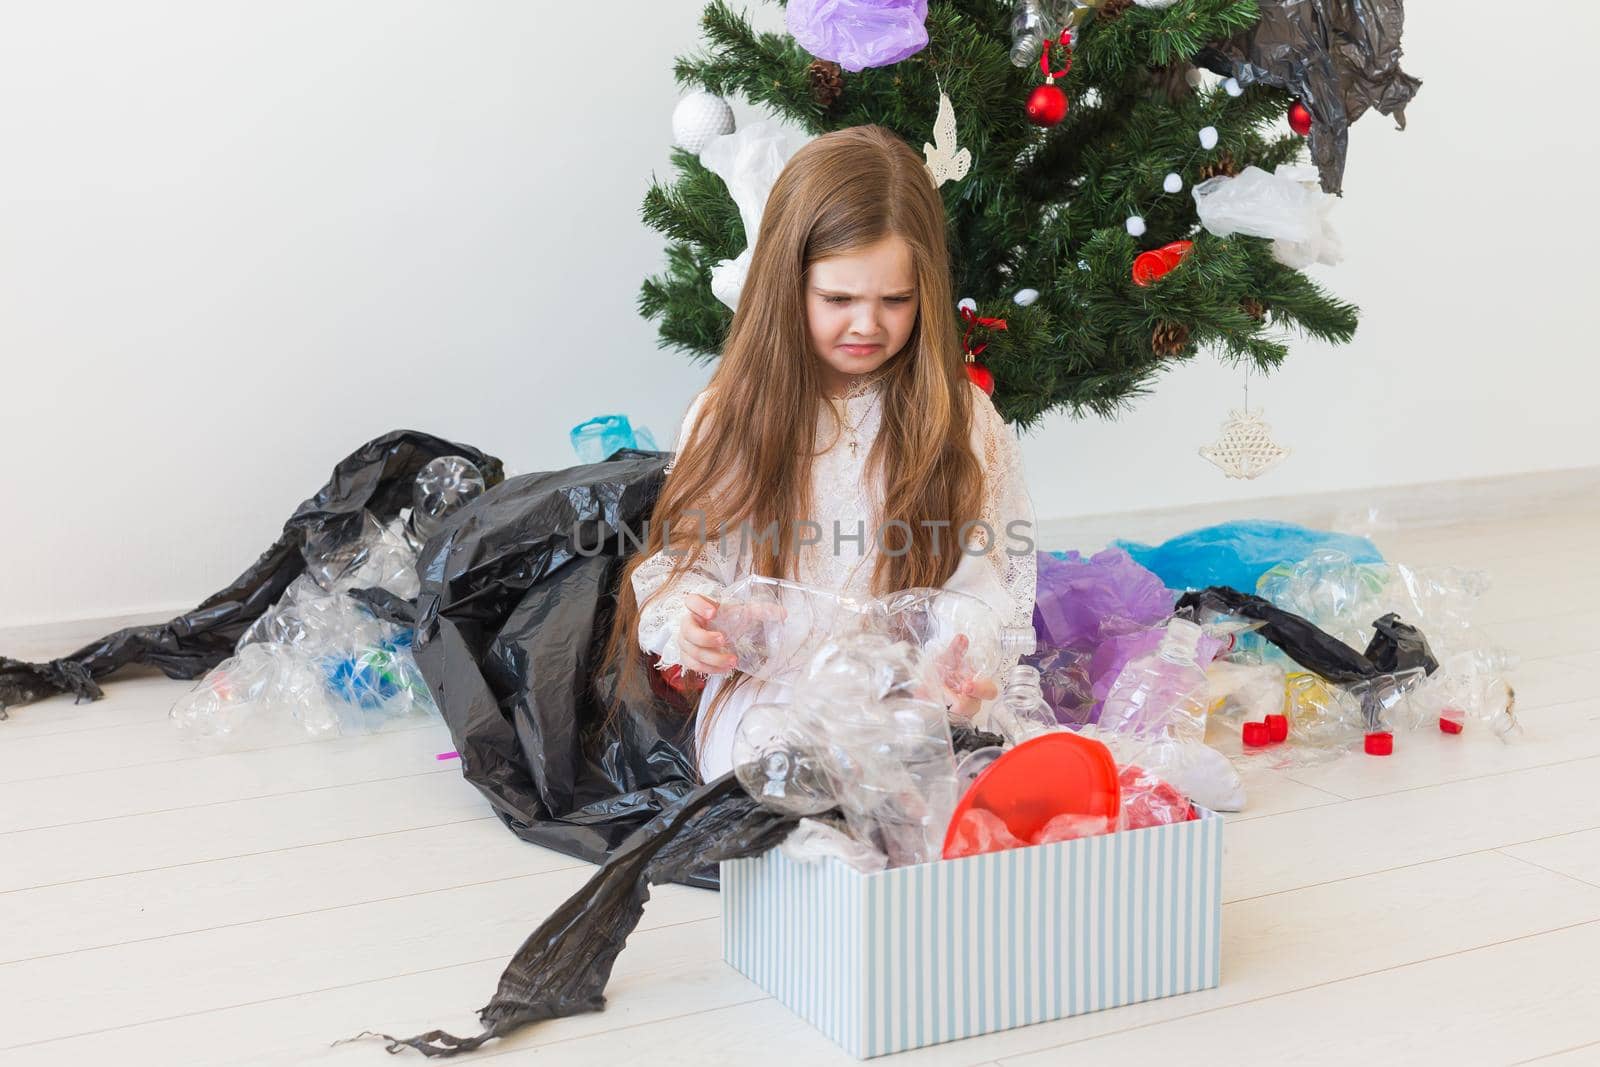 Shocked little child girl looks with opened eyes and worried expression, holding box with various plastic wastes over christmas tree background